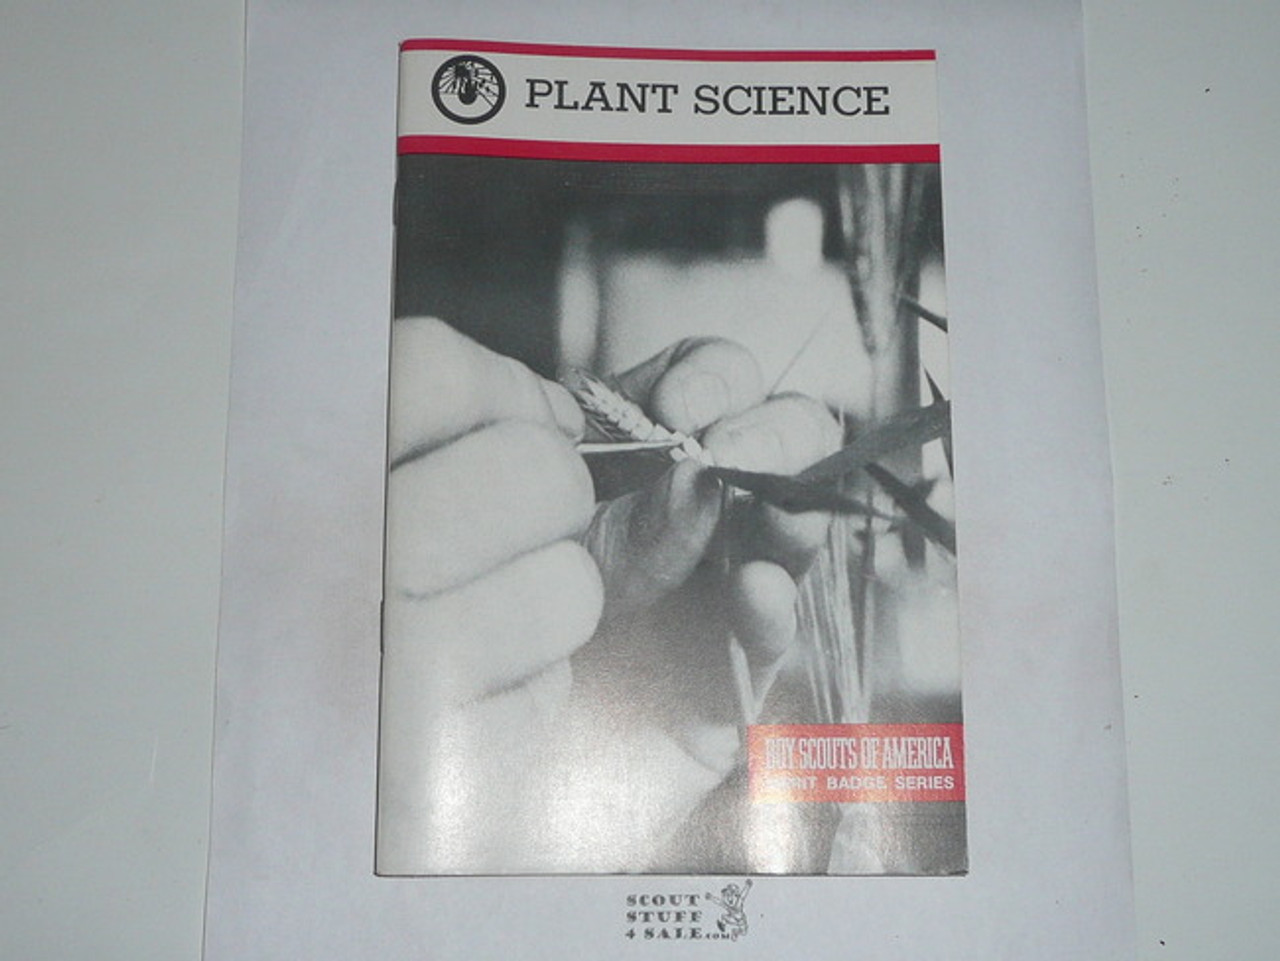 Plant Science Merit Badge Pamphlet, Type 9, Red Band Cover, 9-86 Printing